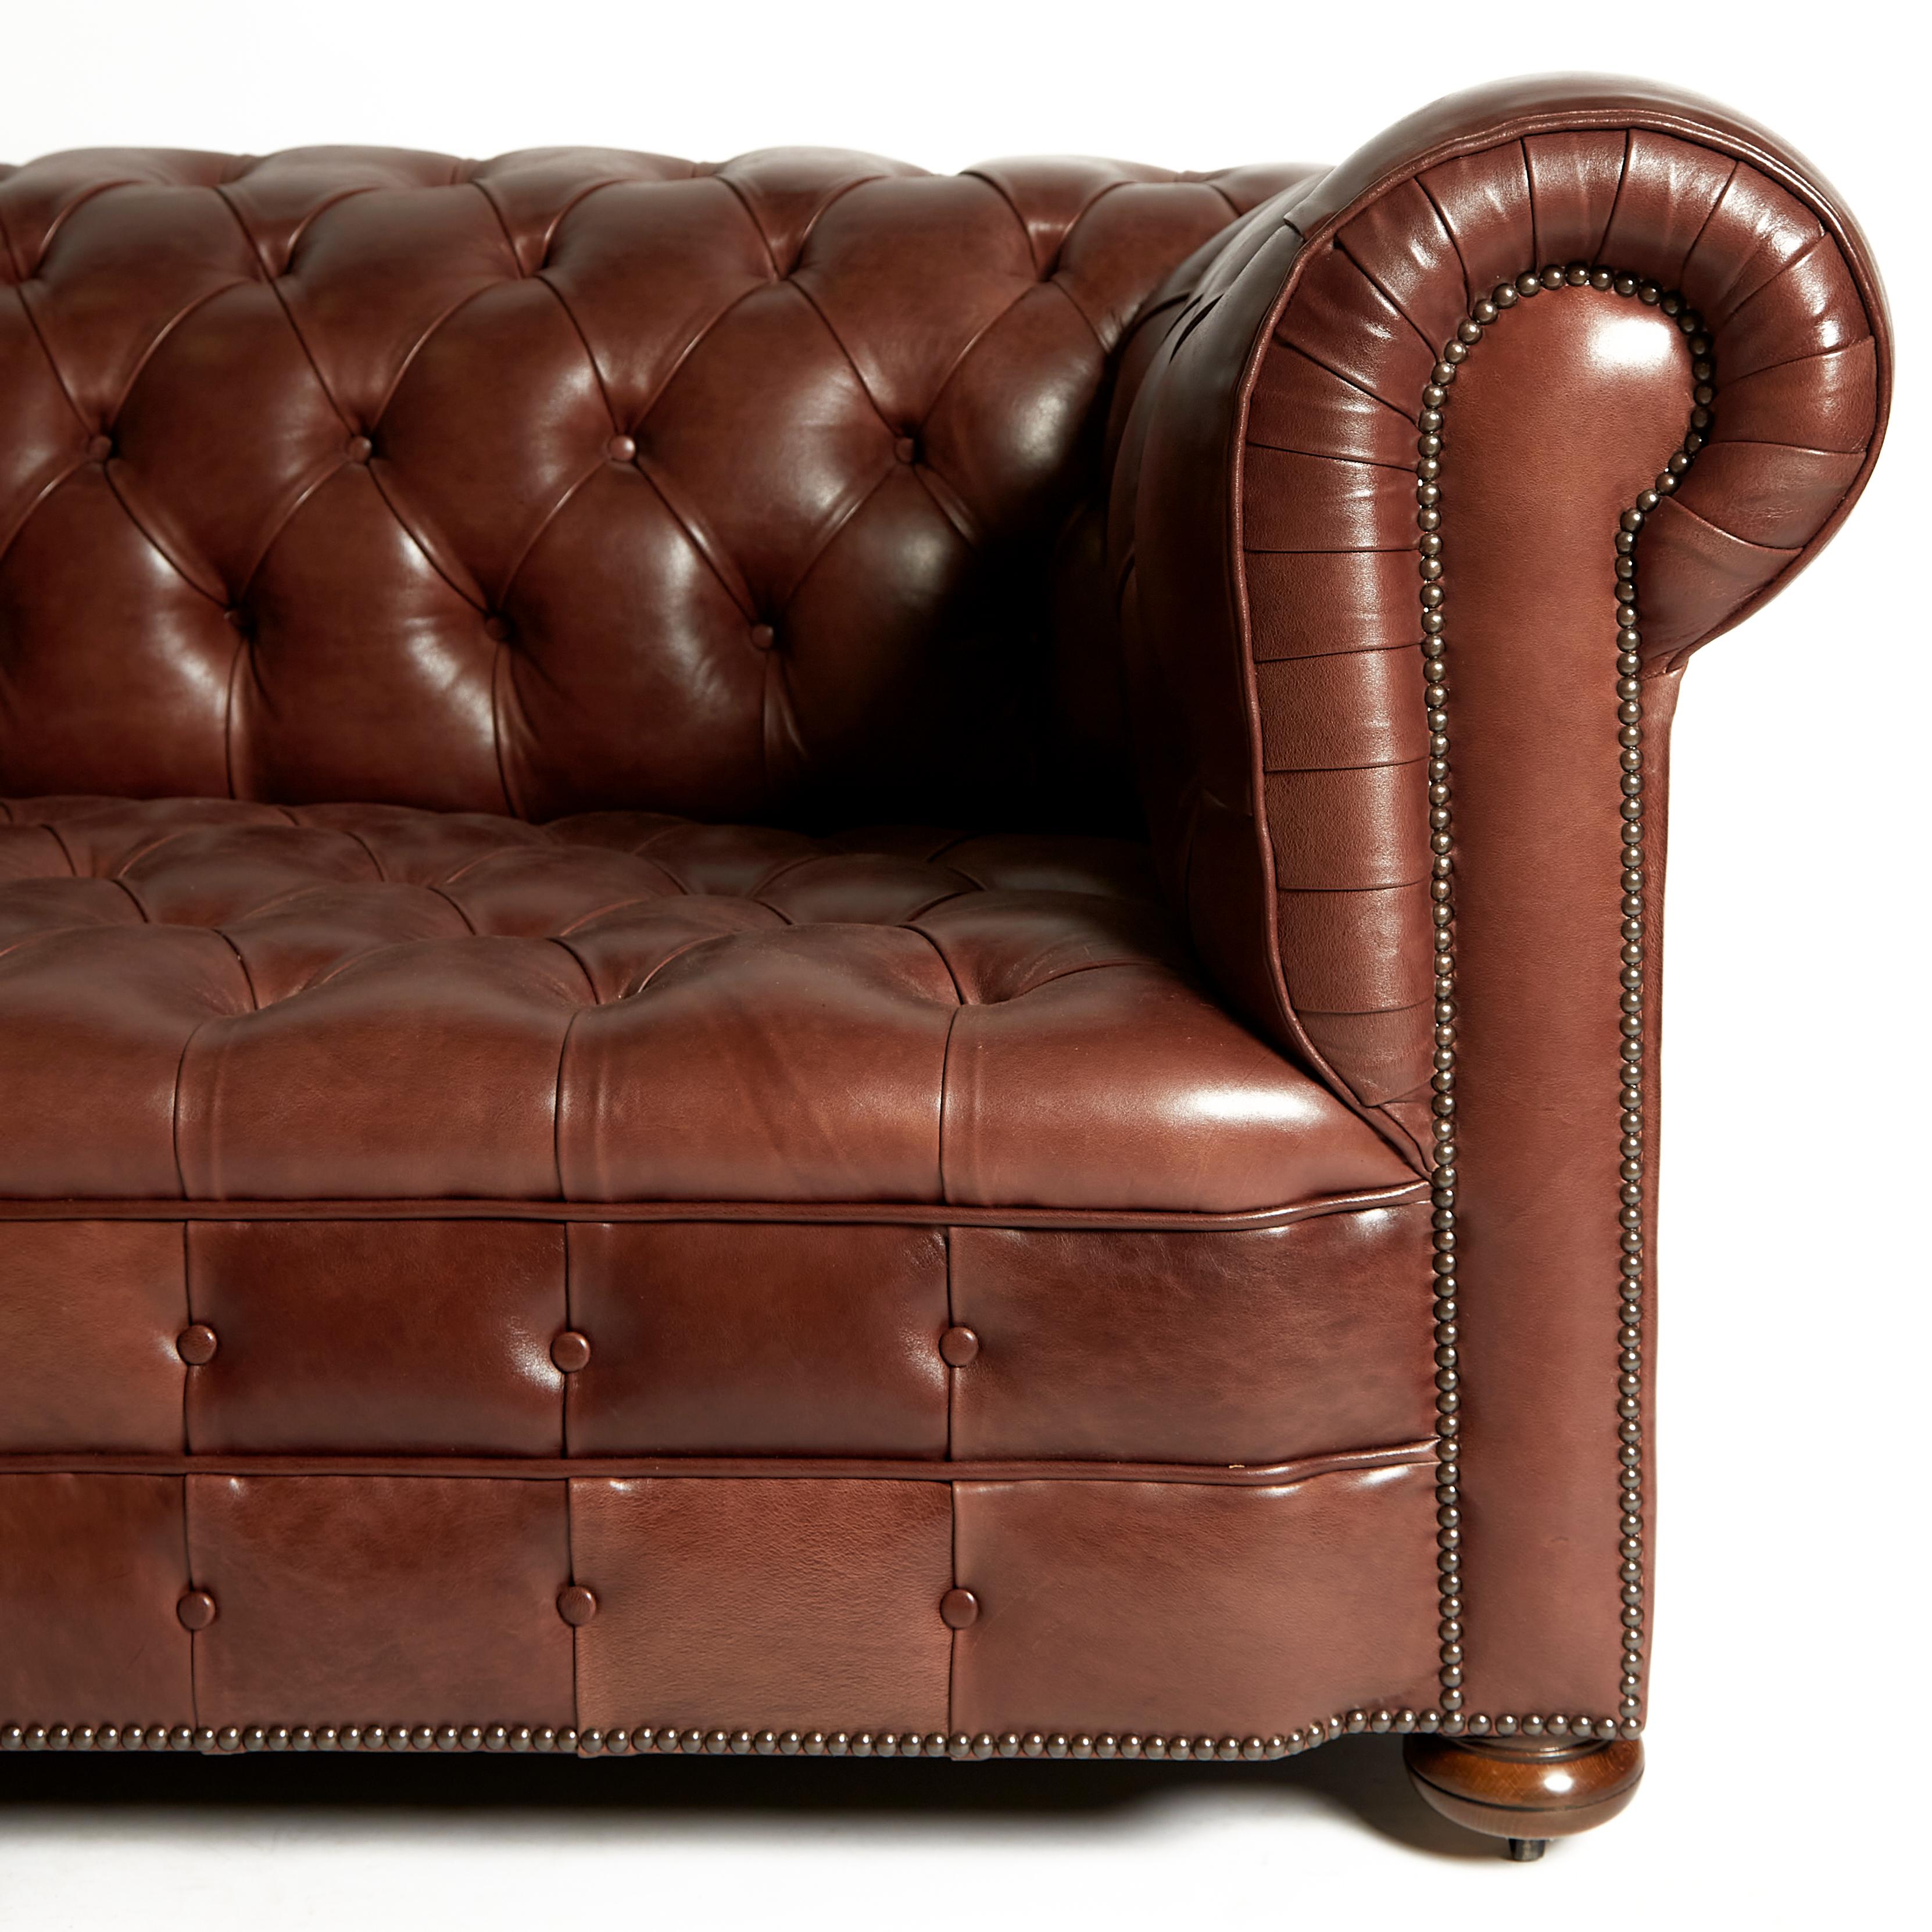 This very handsome and oversized pair of traditionally designed Chesterfield sofas are upholstered in a deep buttoned chocolate brown leather. The sofas feature wide roll back arm rests and stand on mahogany bun feet. Each sofa measures 104 in -